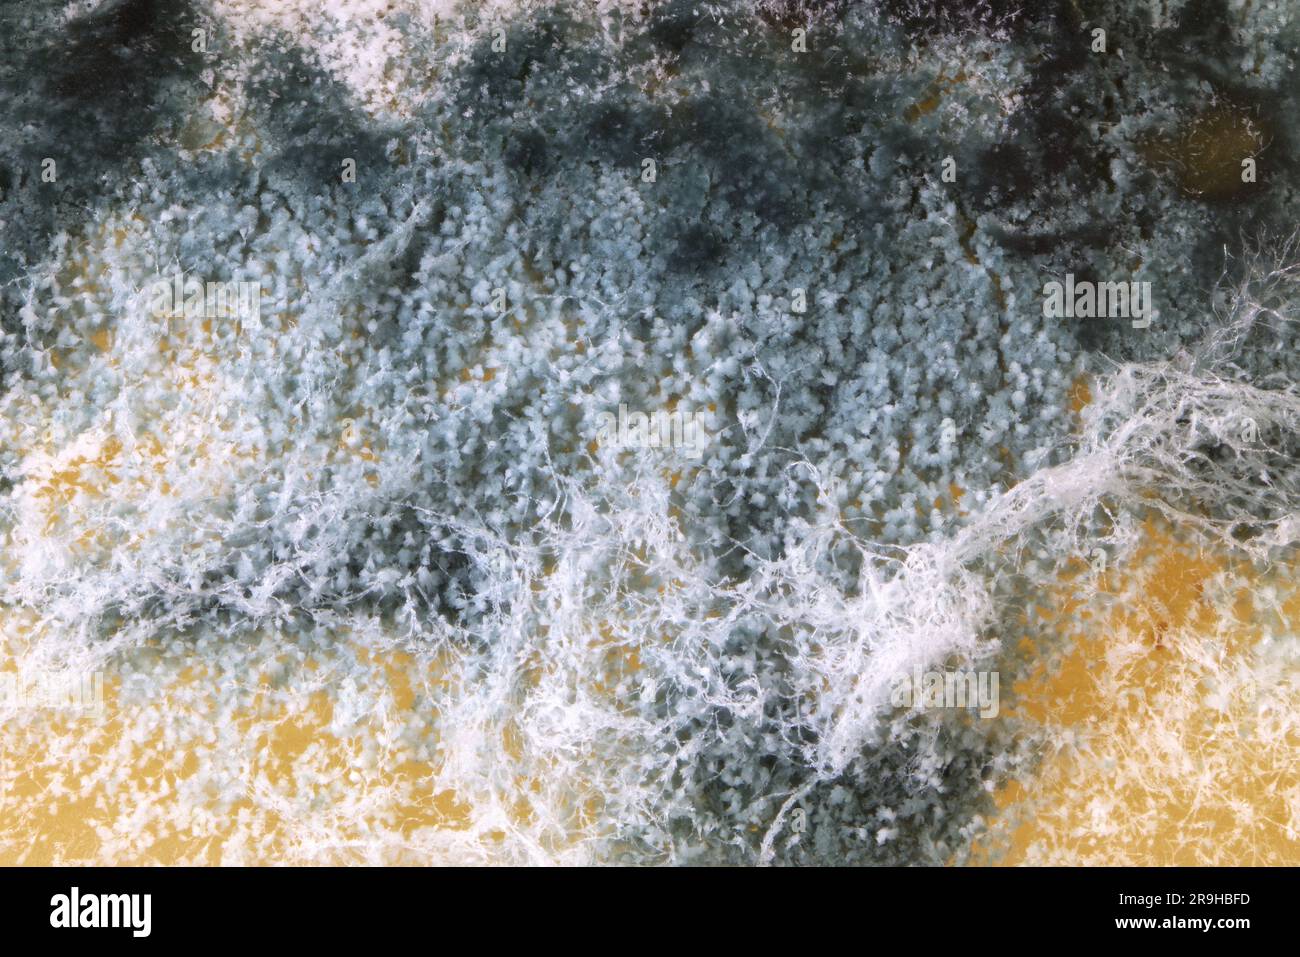 Microscopic view of mold on cheese, hard cheese with white and black mold on it. Moldy fungus on food Stock Photo